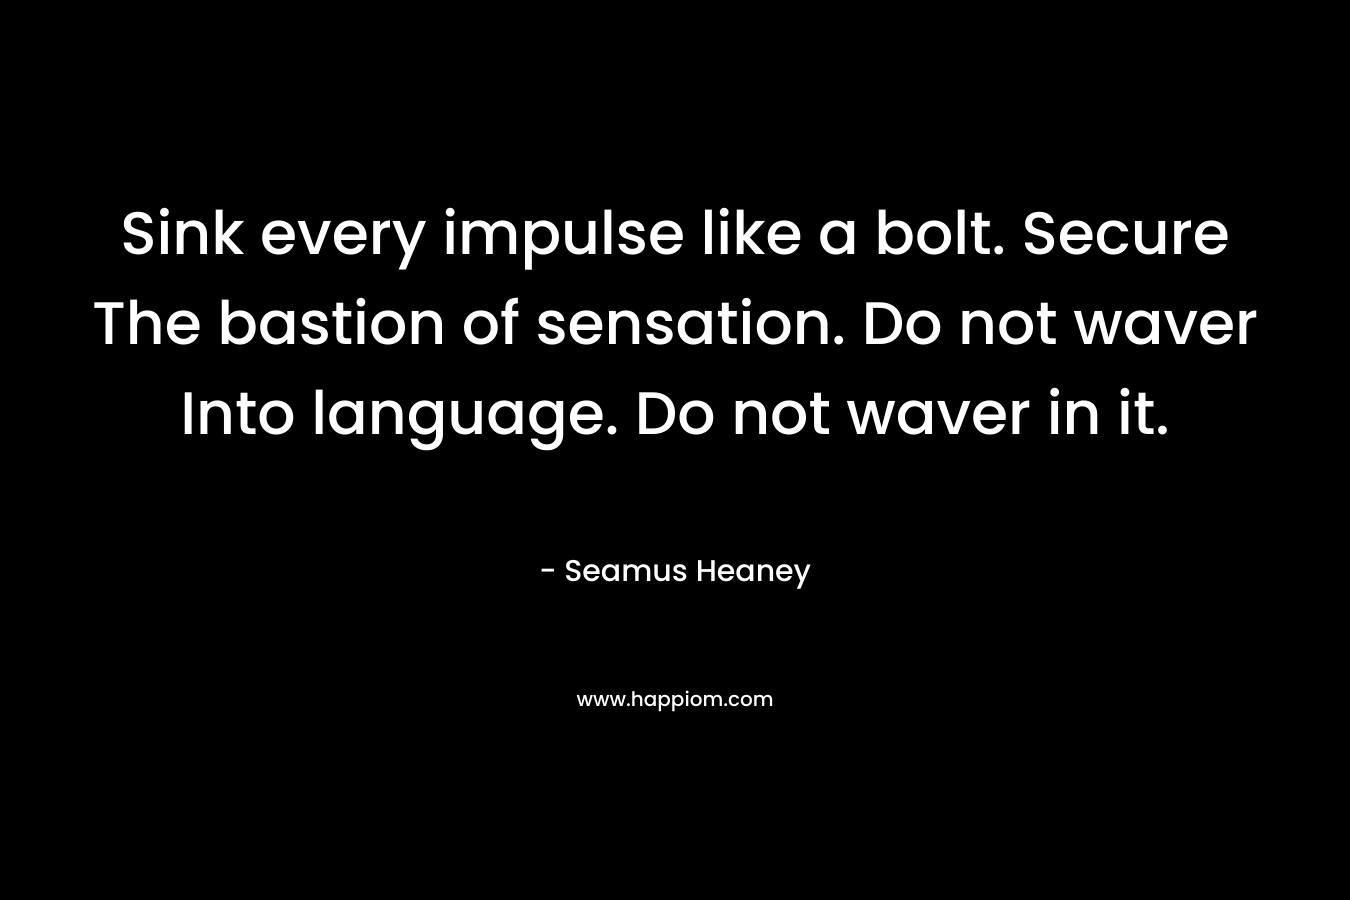 Sink every impulse like a bolt. Secure The bastion of sensation. Do not waver Into language. Do not waver in it. – Seamus Heaney